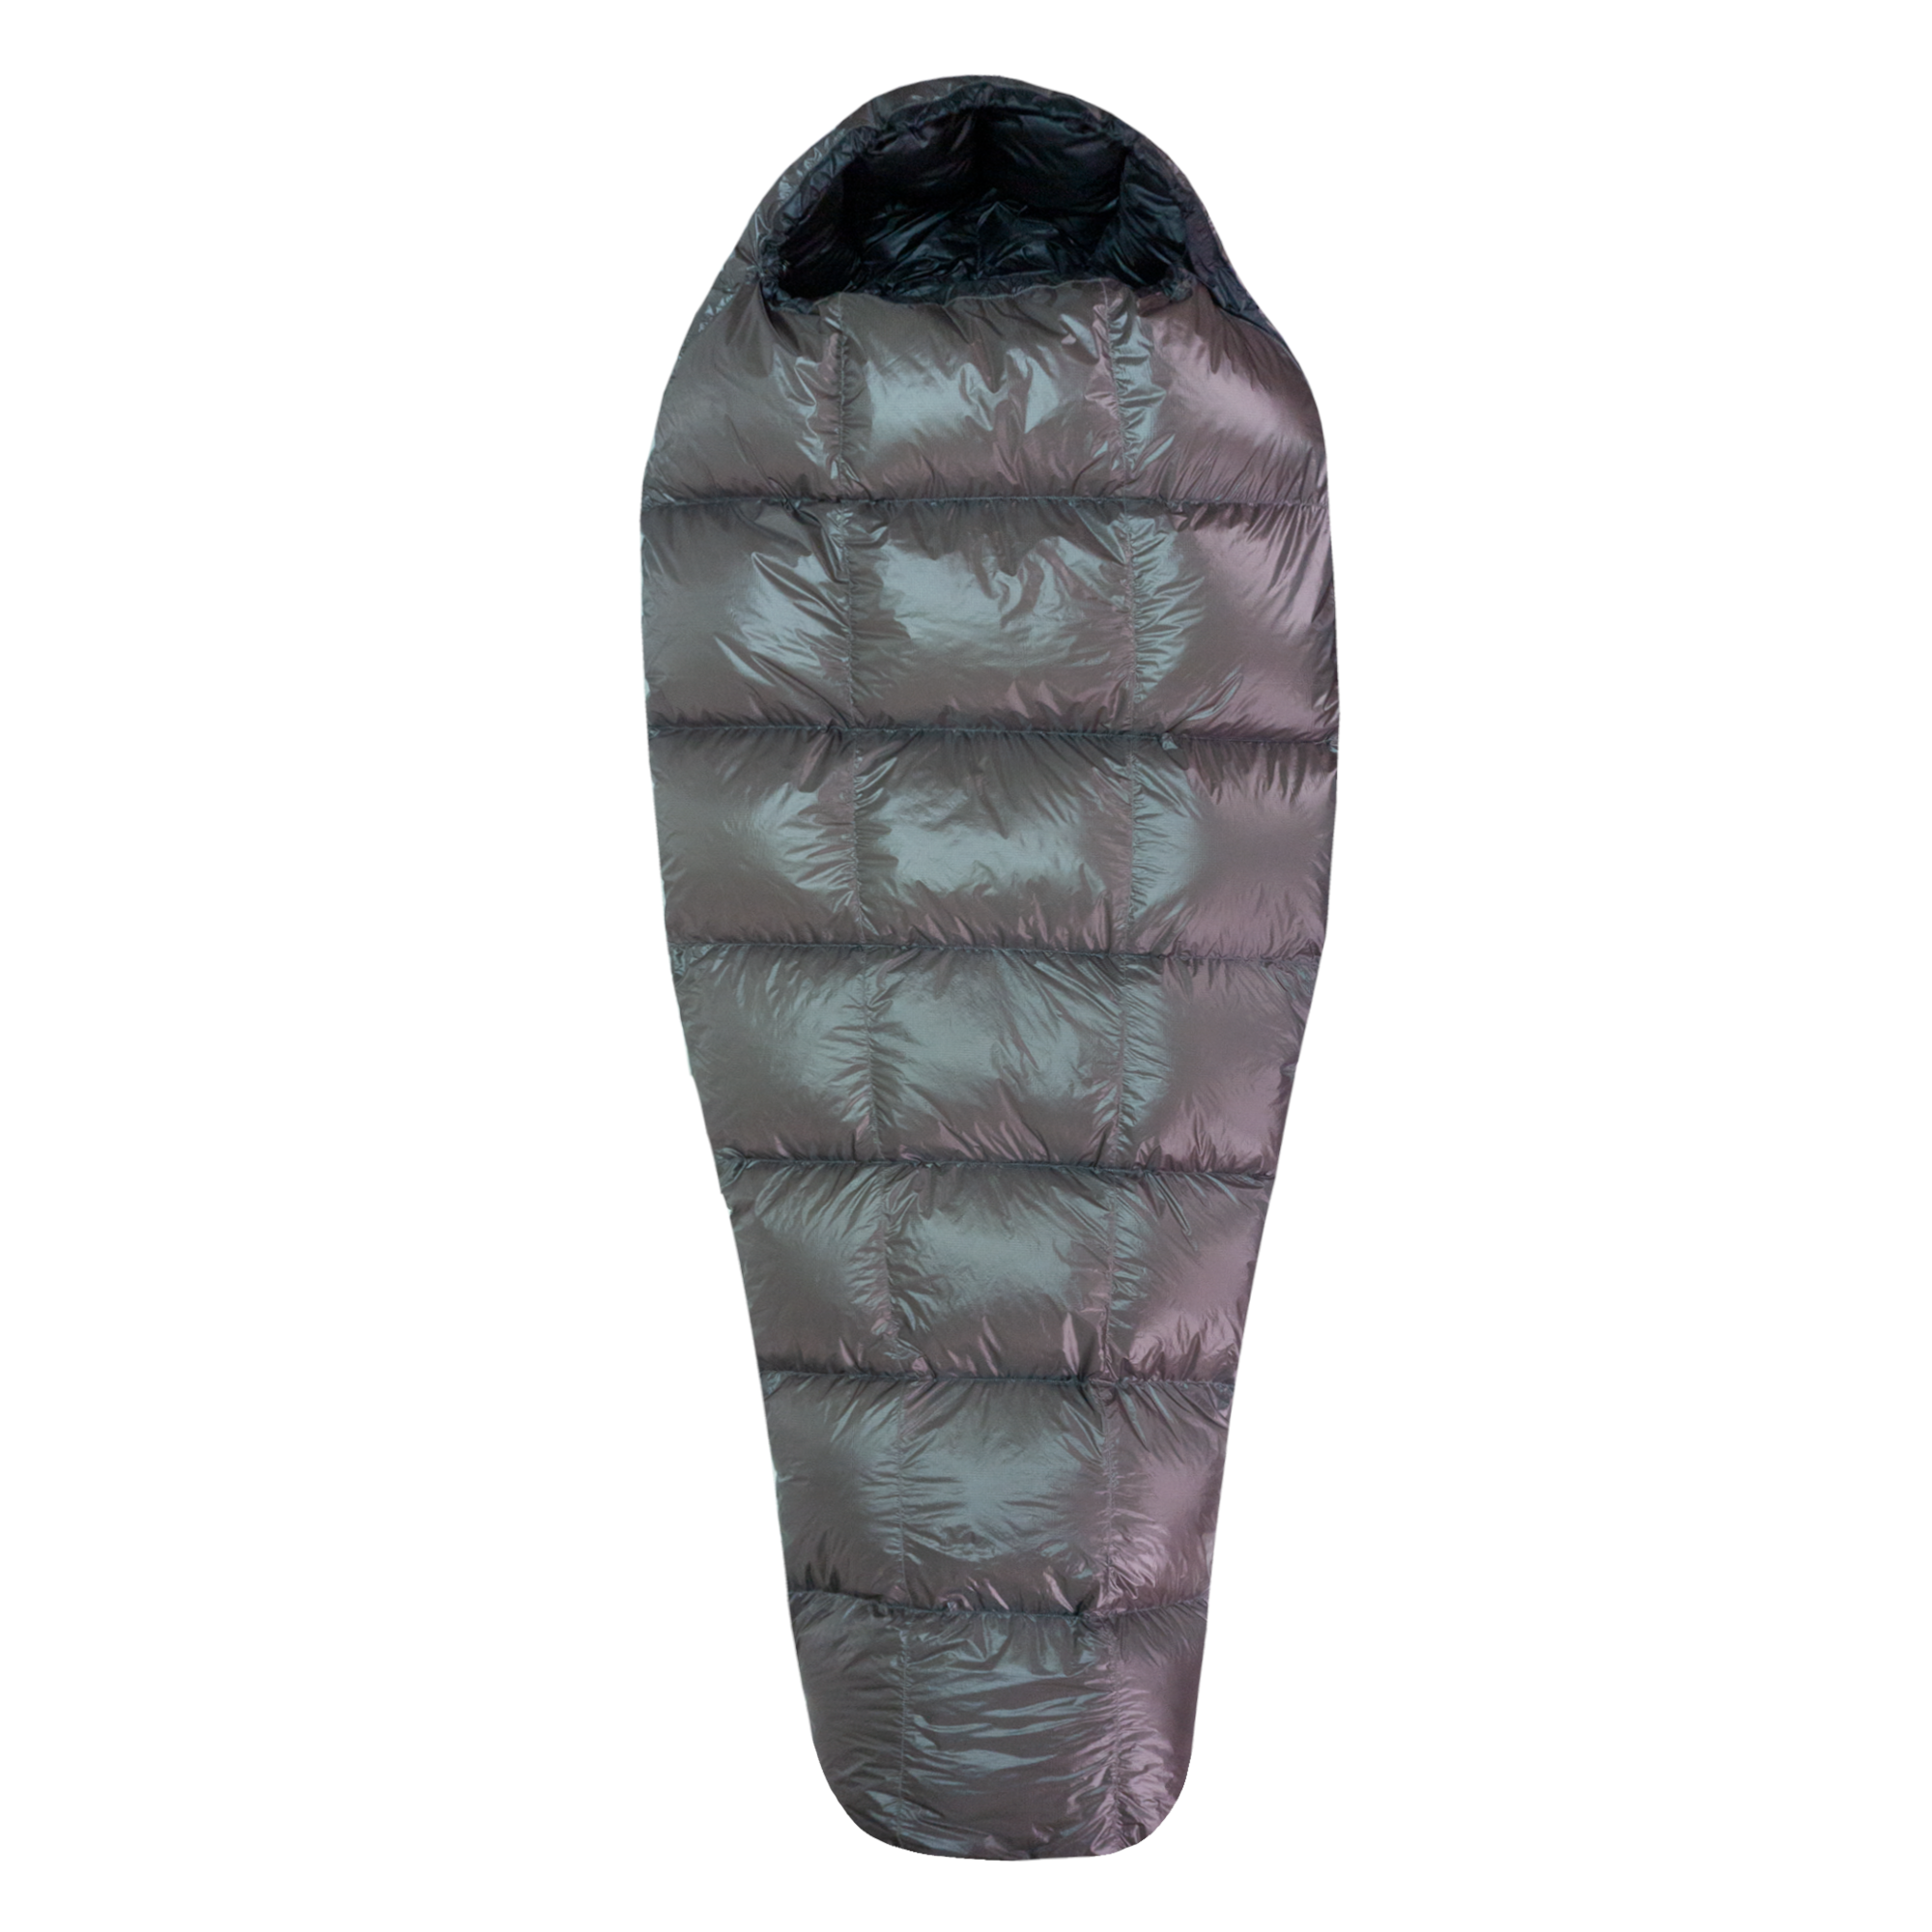 Western Mountaineering Highlite down sleeping bag partially open, in purple with black lining